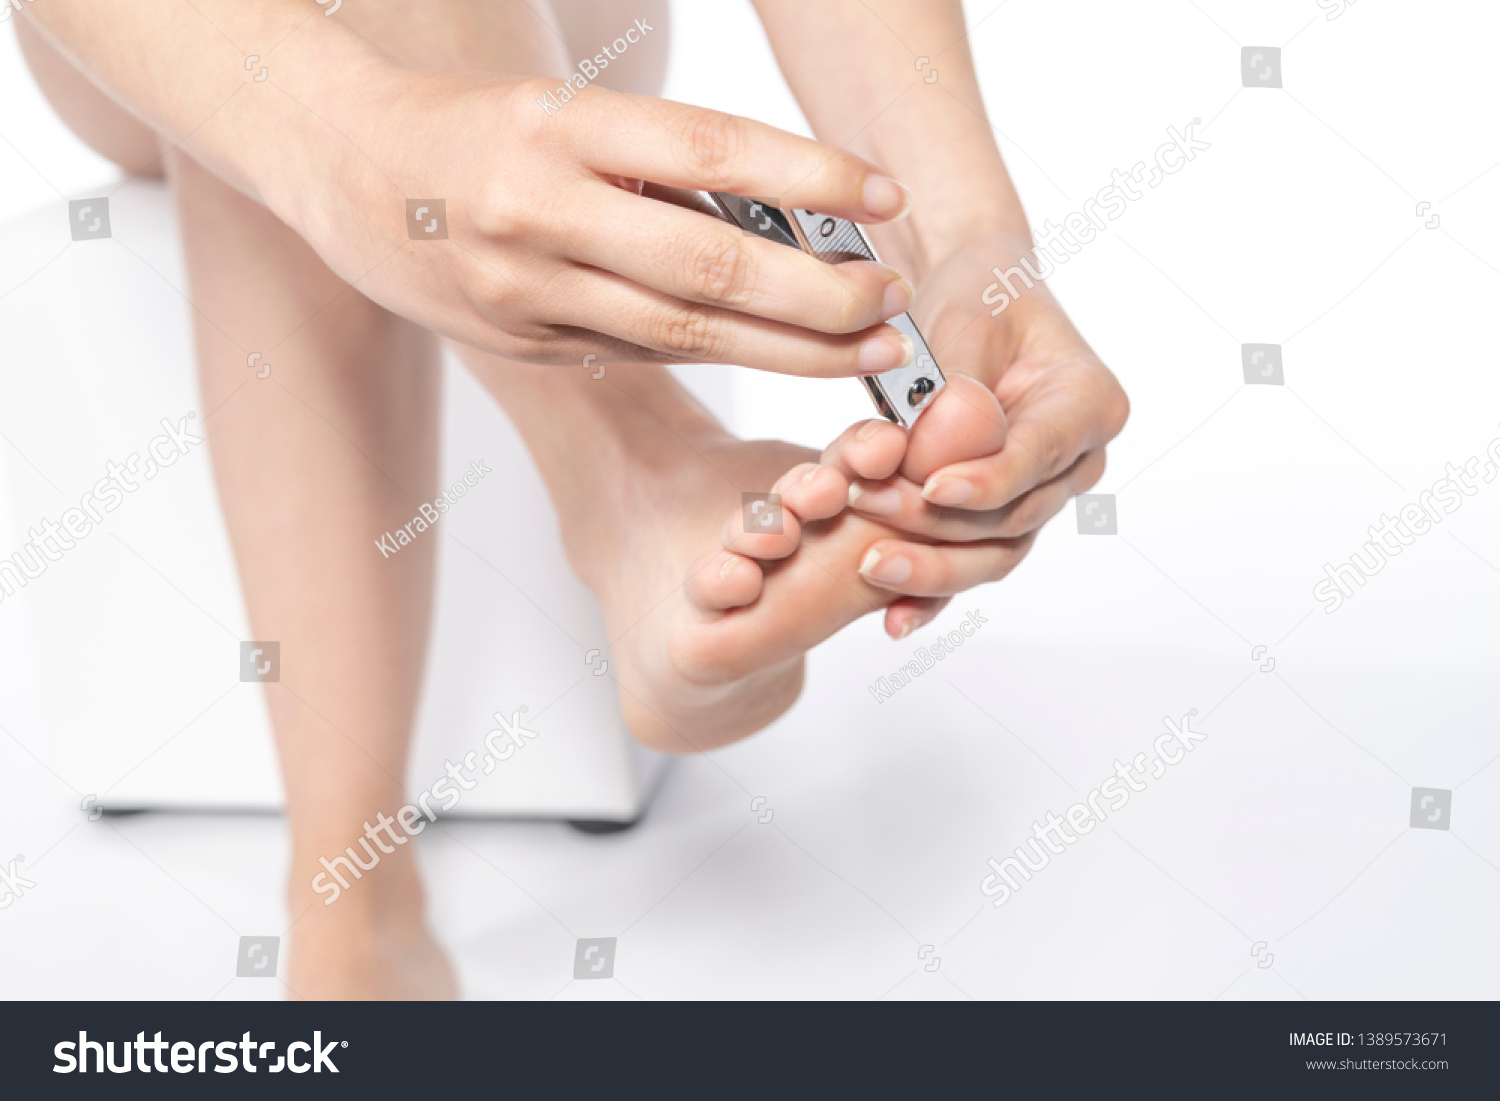 Woman clipping her toenails. isolated on white background. #1389573671